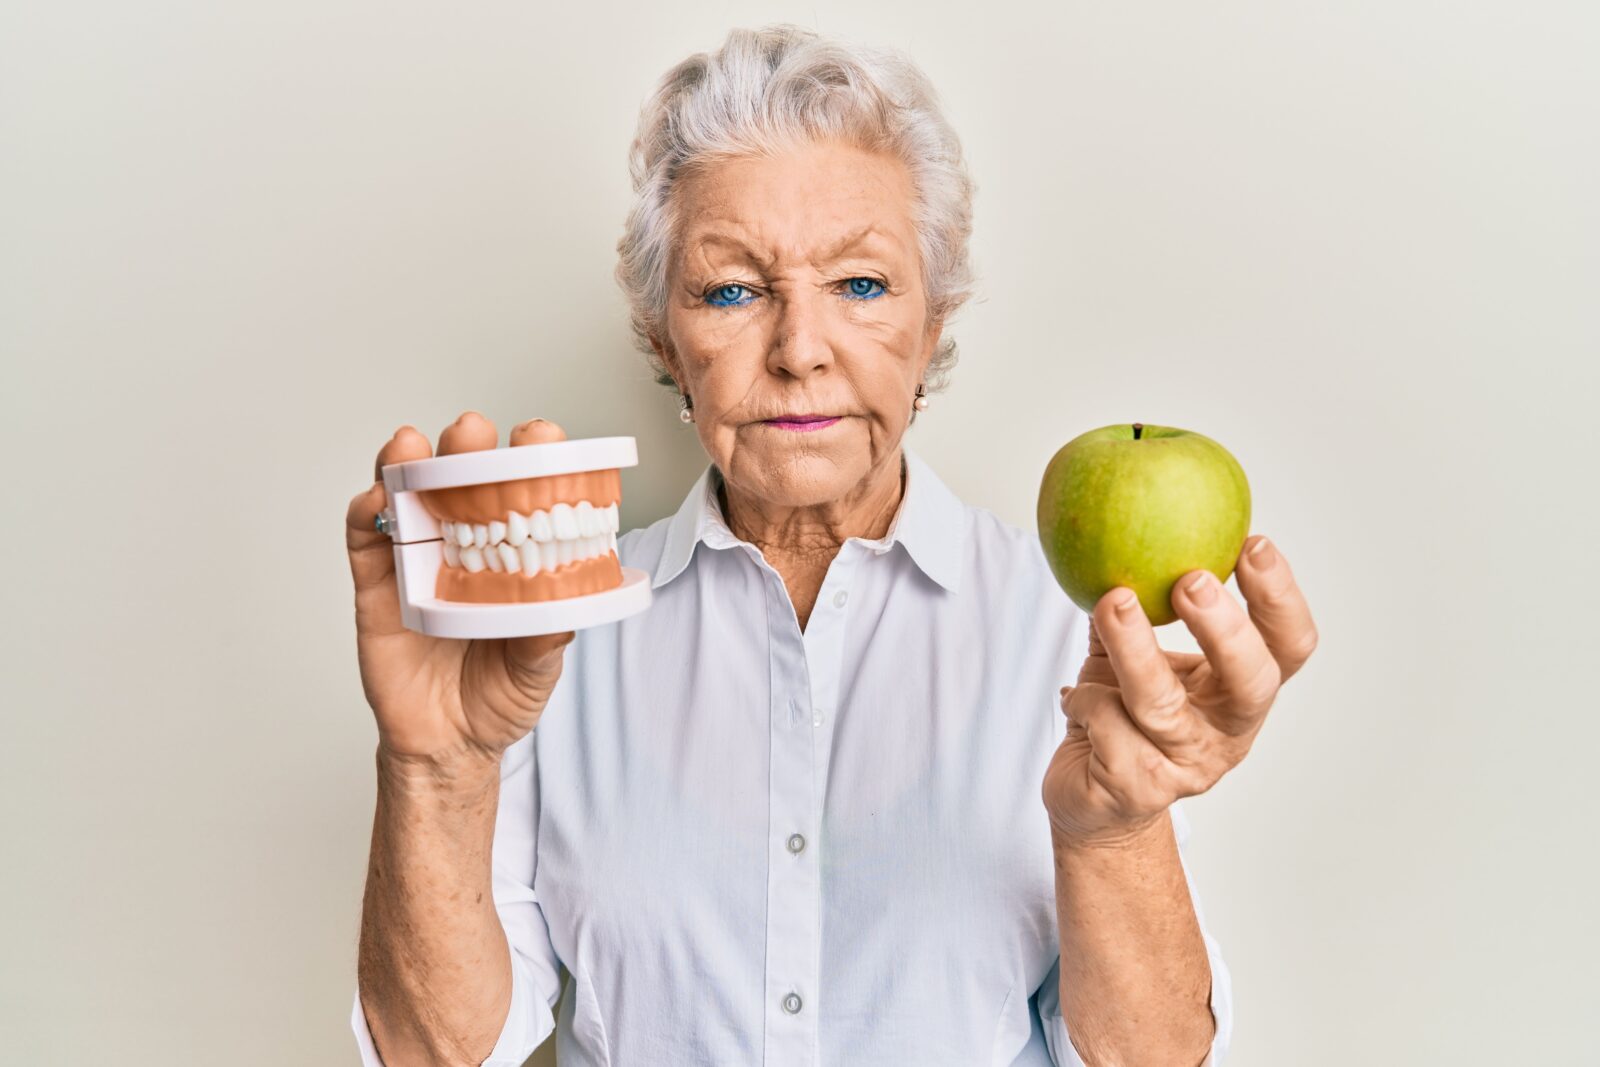 older lady holding dentures in one hand and an apple in the other hand with an unhappy expression